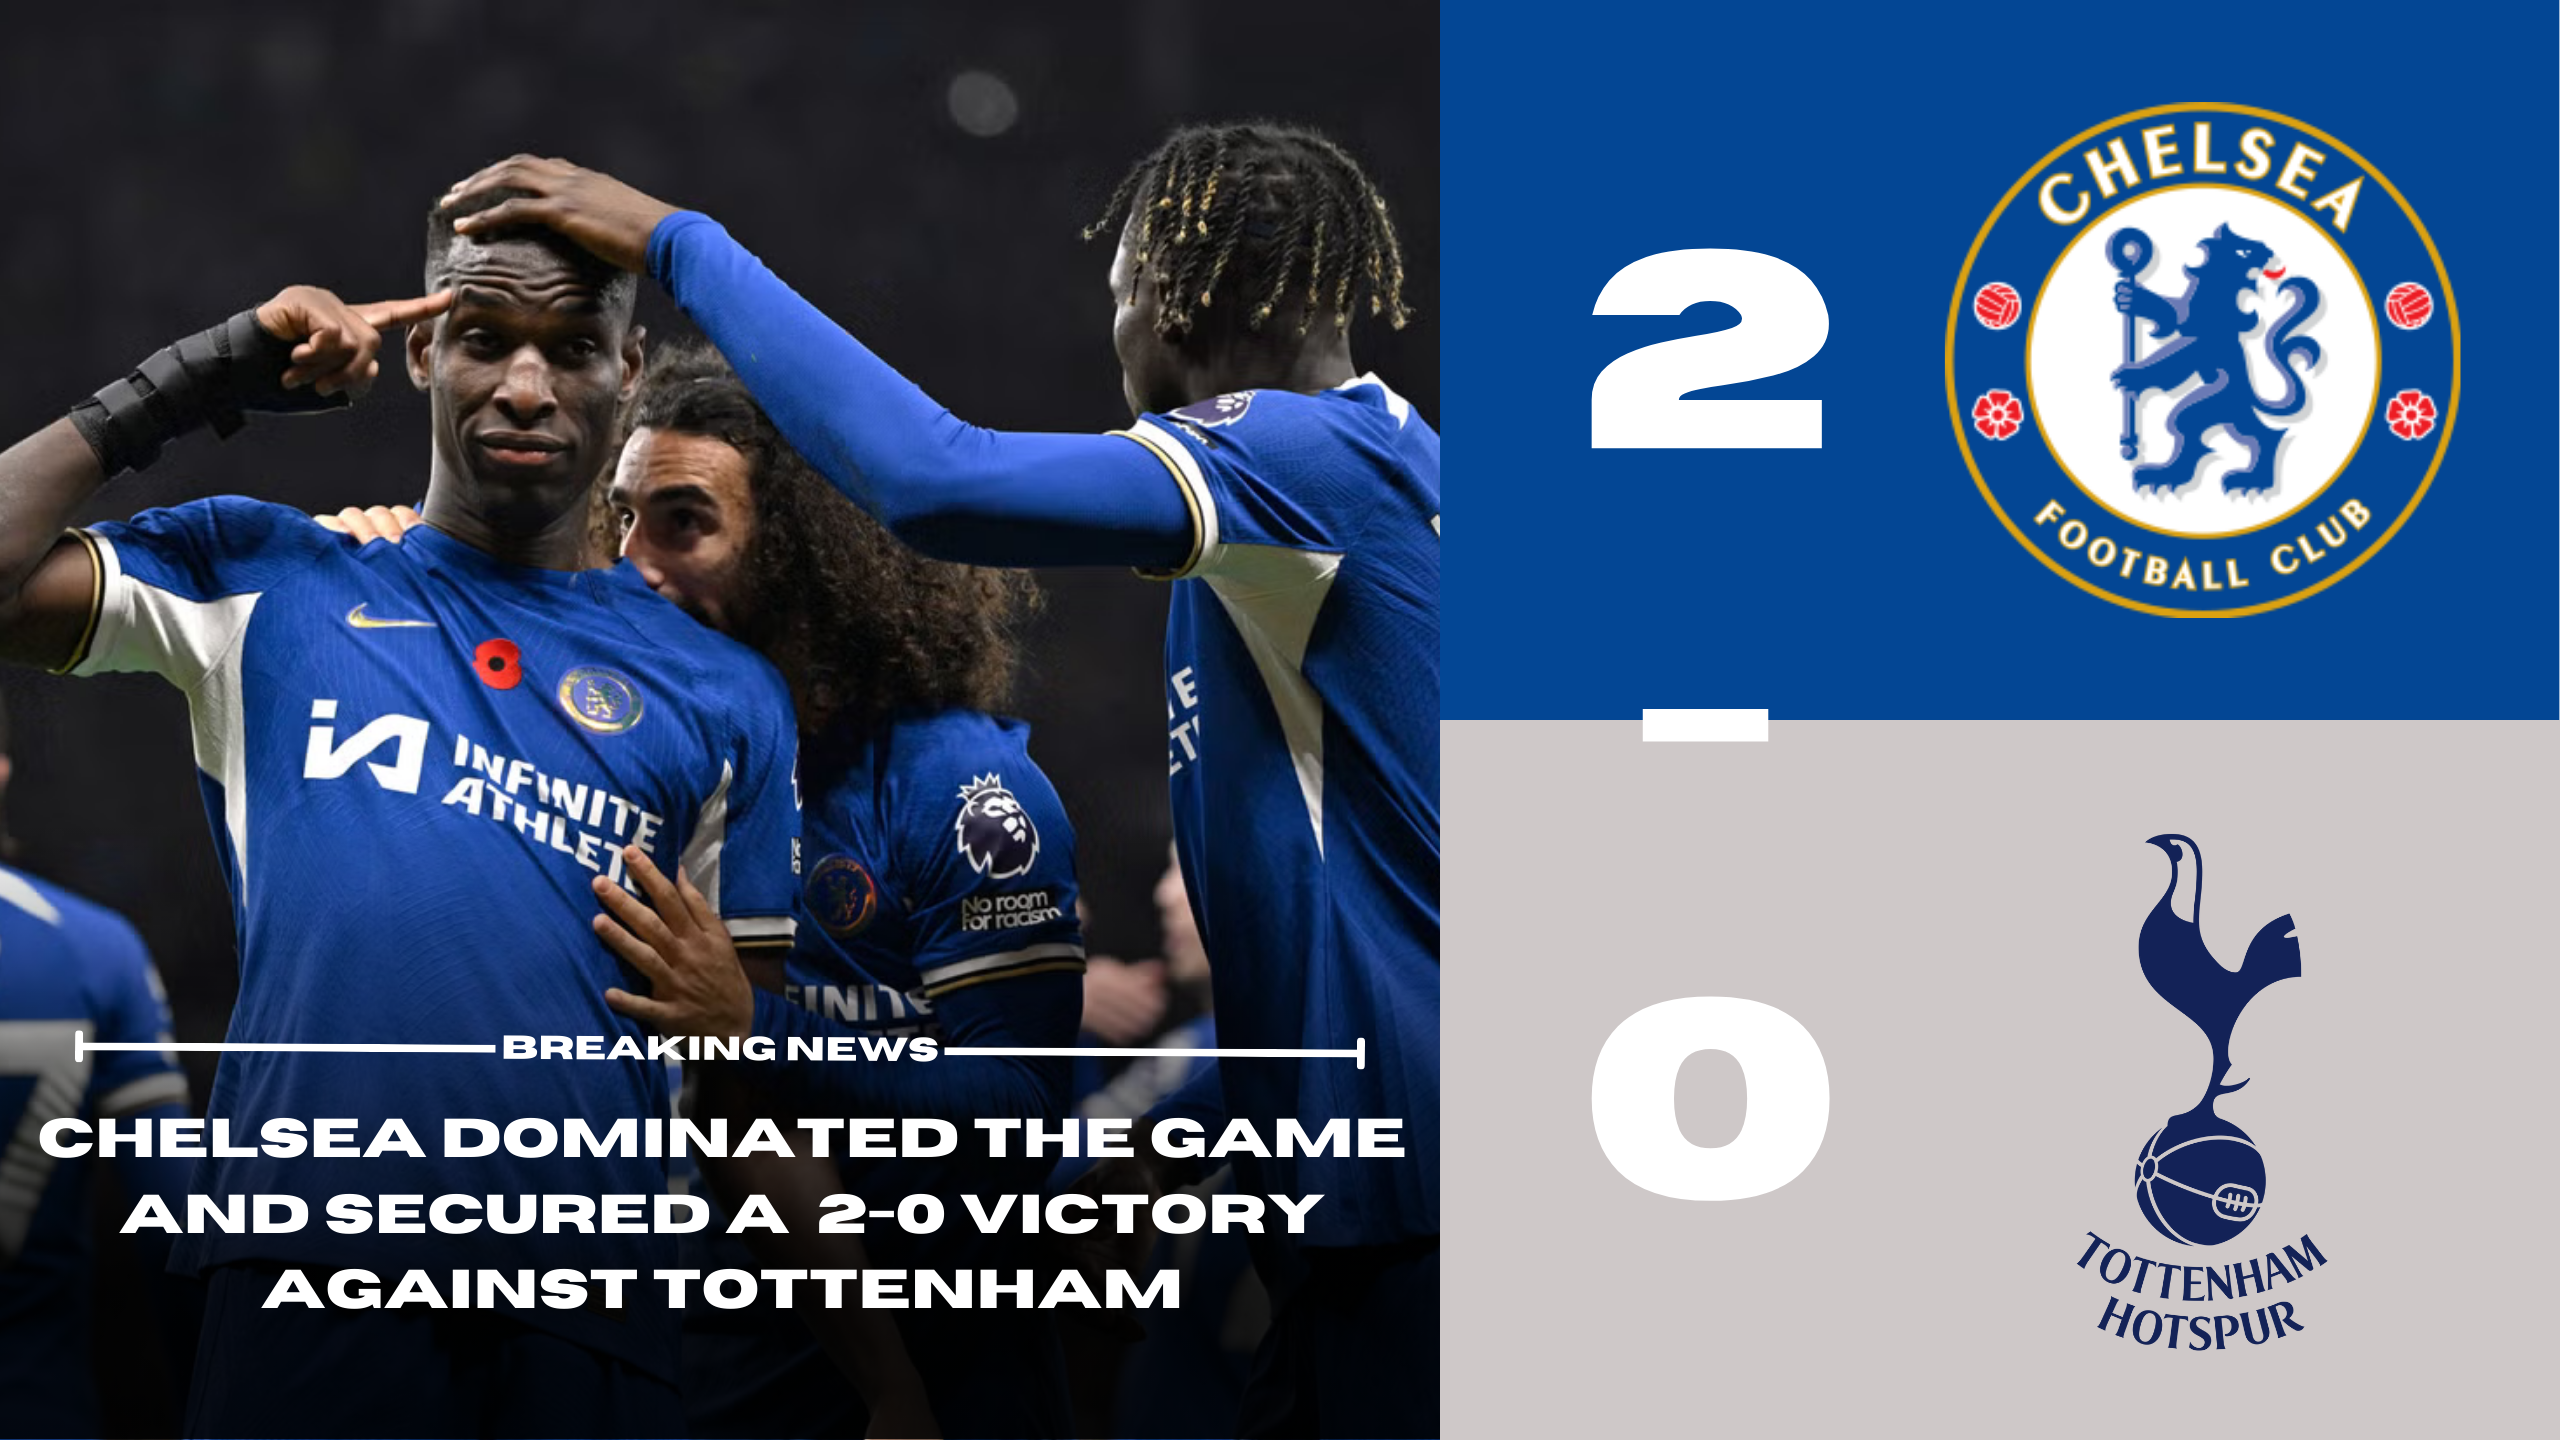 Chelsea dominated the game and secured a  2-0 victory against Tottenham